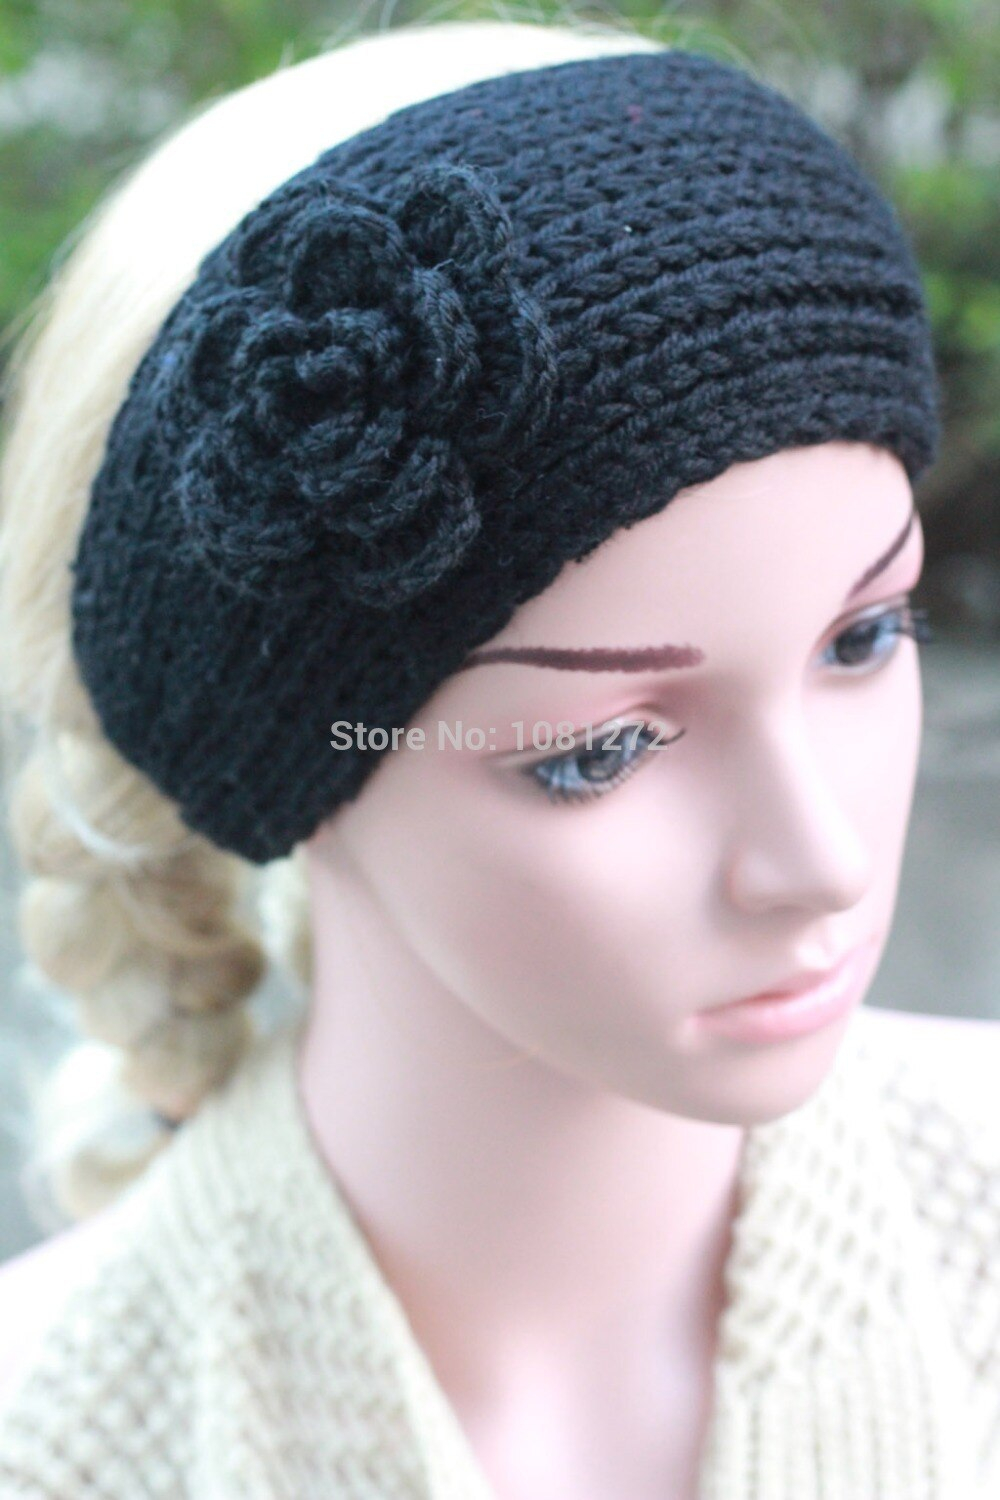 Knit Headband With Flower Pattern Us 529 Black Knit Headbandsmall Flower Headbandearwarmerhair Accessorieshead Wrapheadband Patternfall And Winter Hair Accessory In Womens